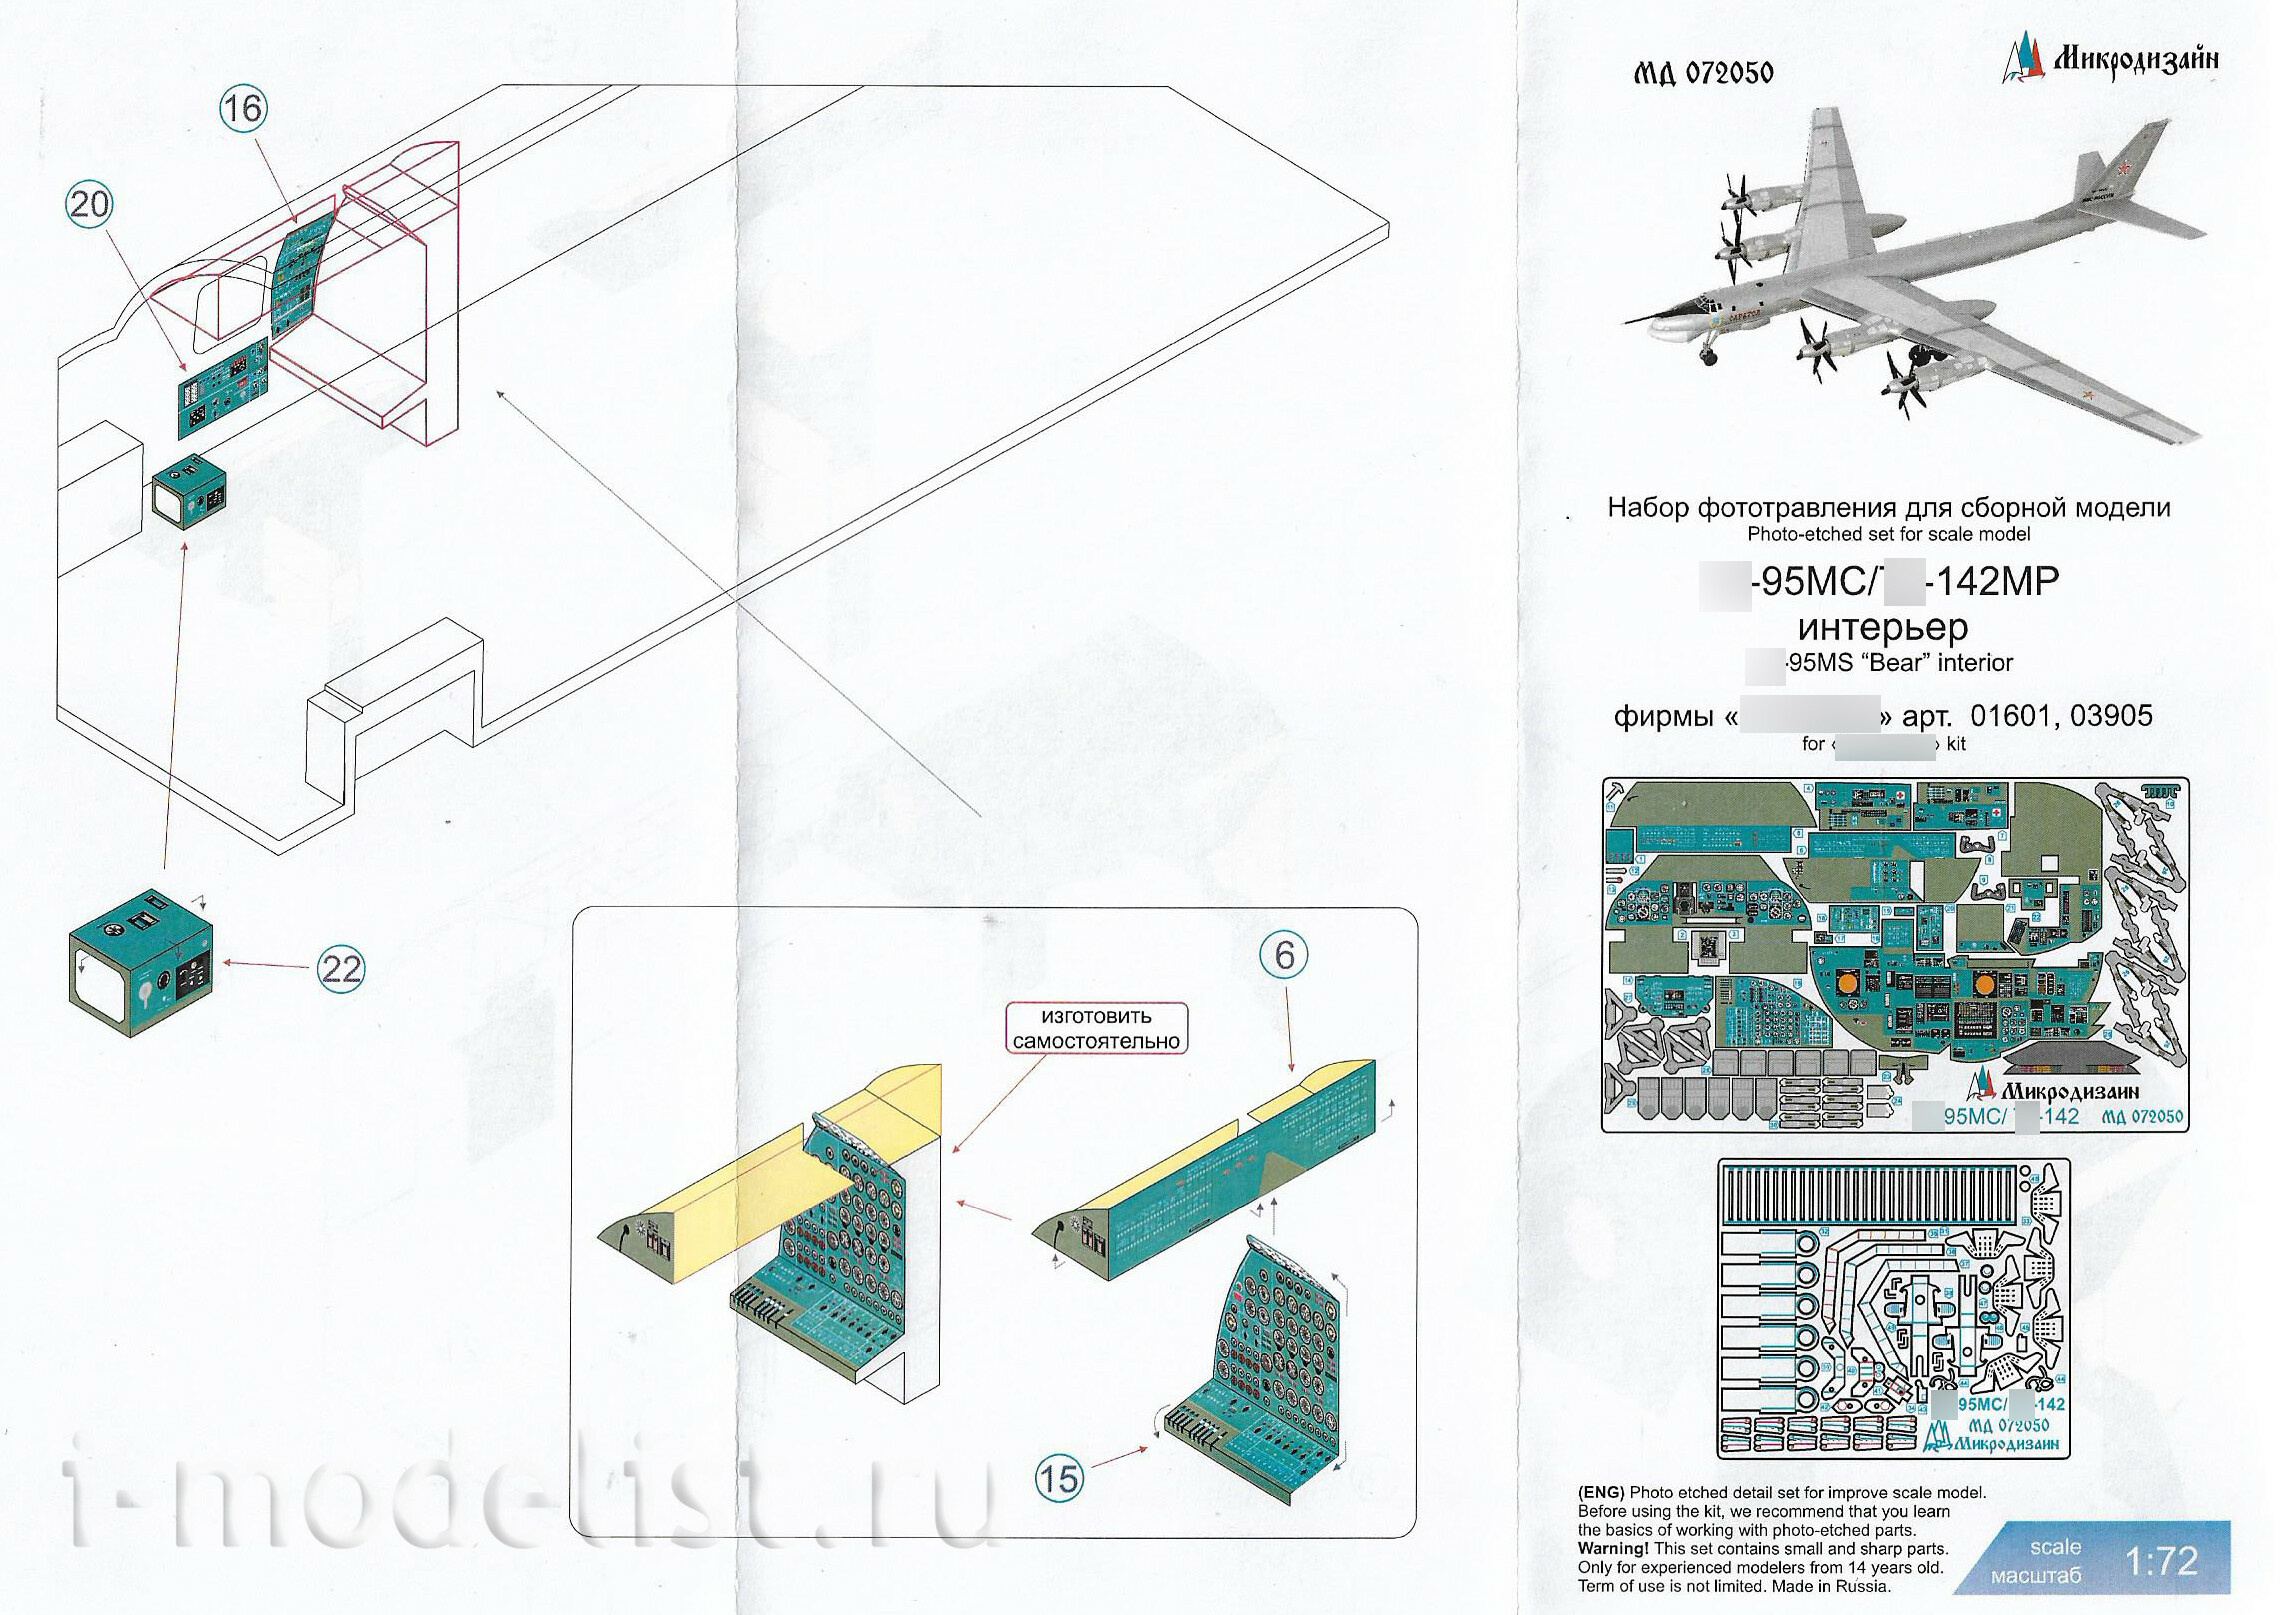 072050 Microdesign 1/72 Color Photo Etching Kit for Tupolev-95MS/Tupolev-142MR (Trumpeter)